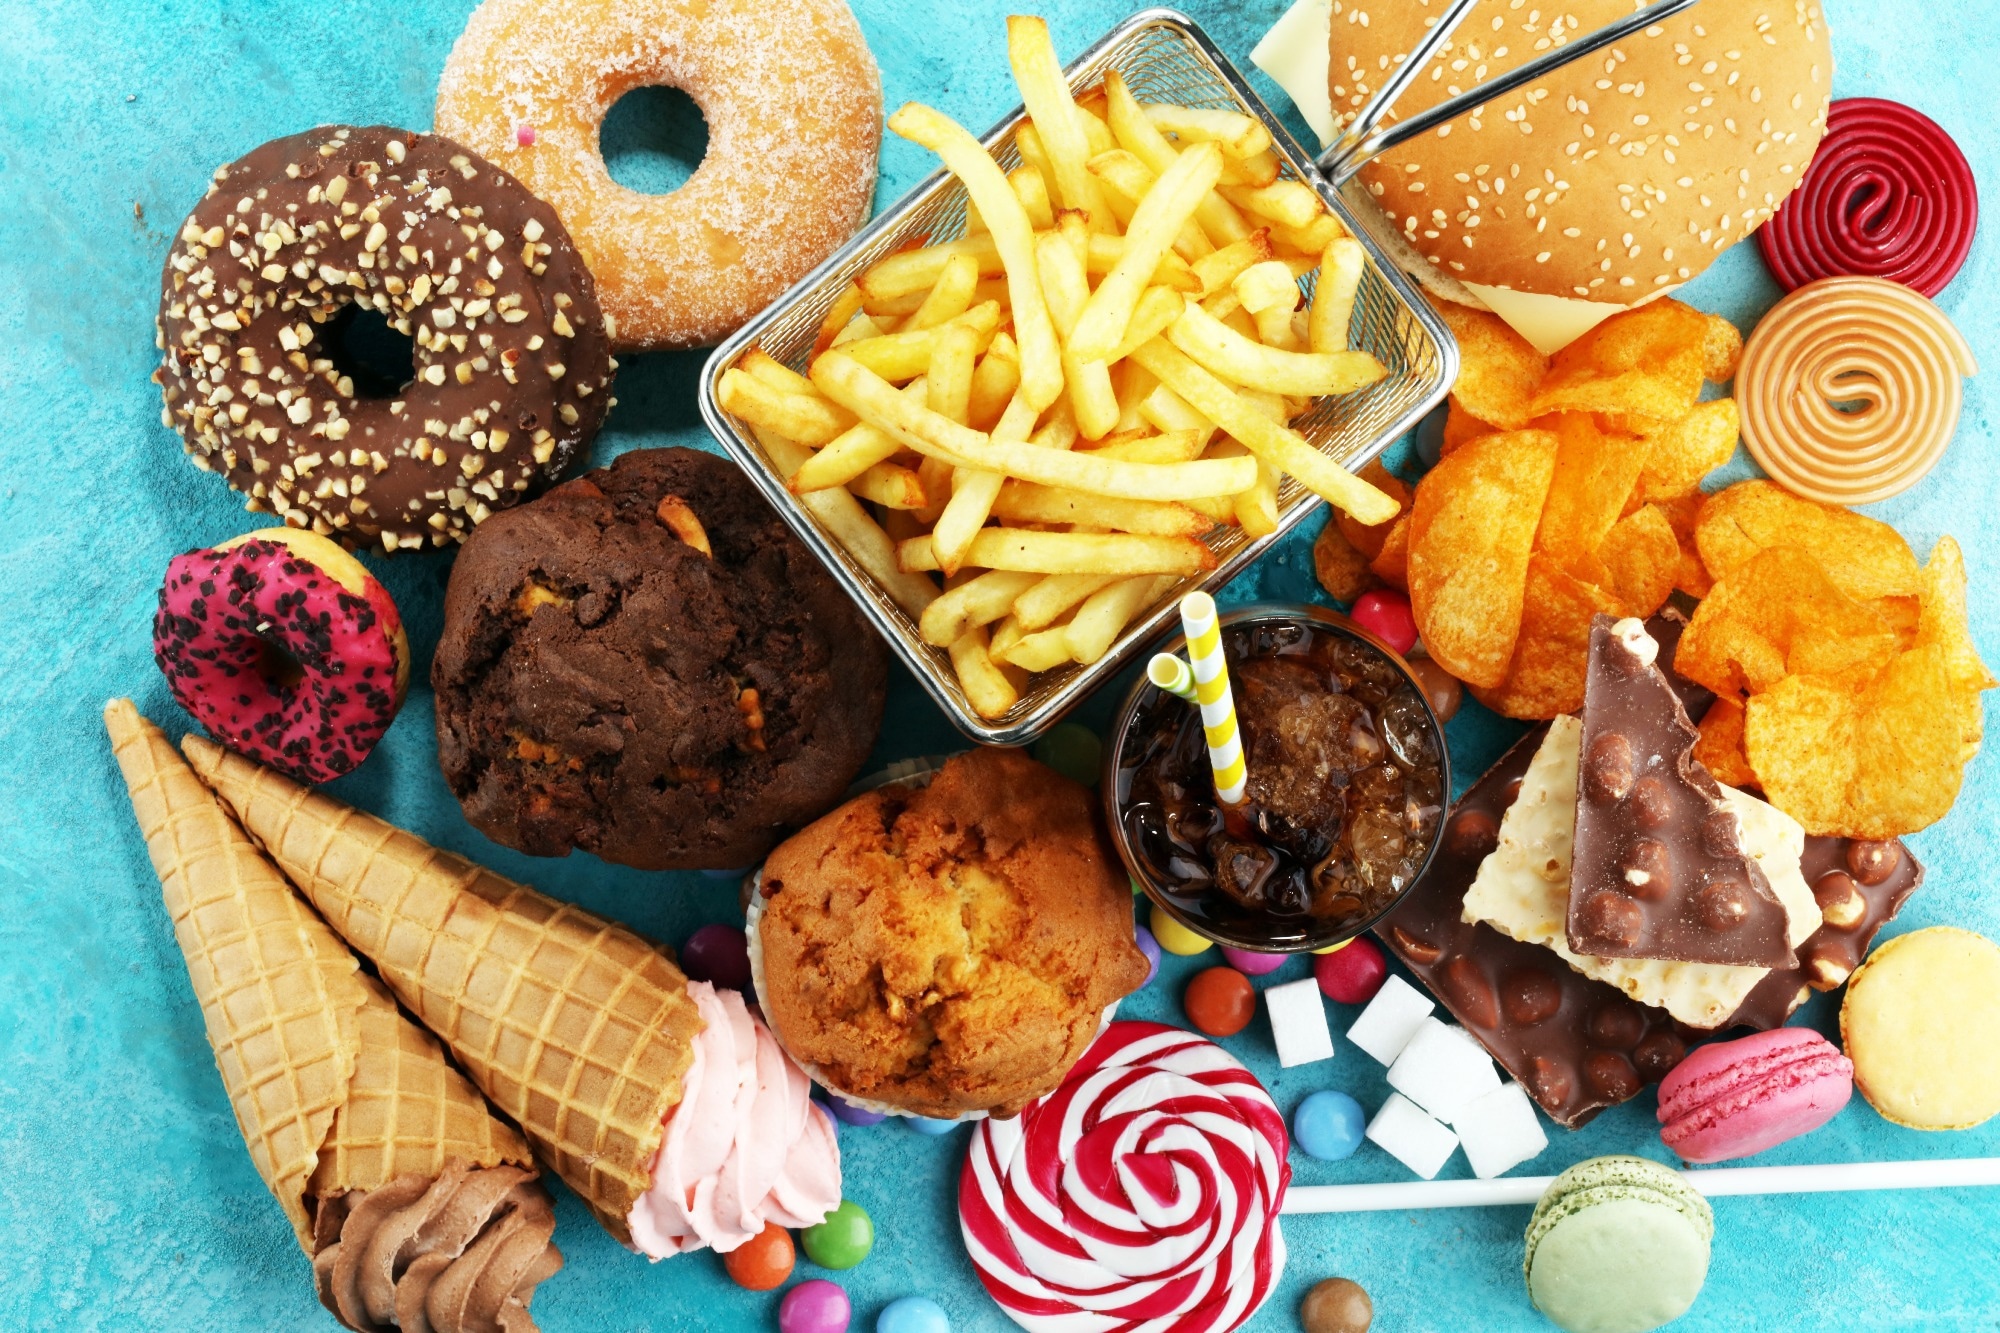 Study: Ultra-processed food intake and incident venous thromboembolism risk: Prospective cohort study. Image Credit: beats1/Shutterstock.com